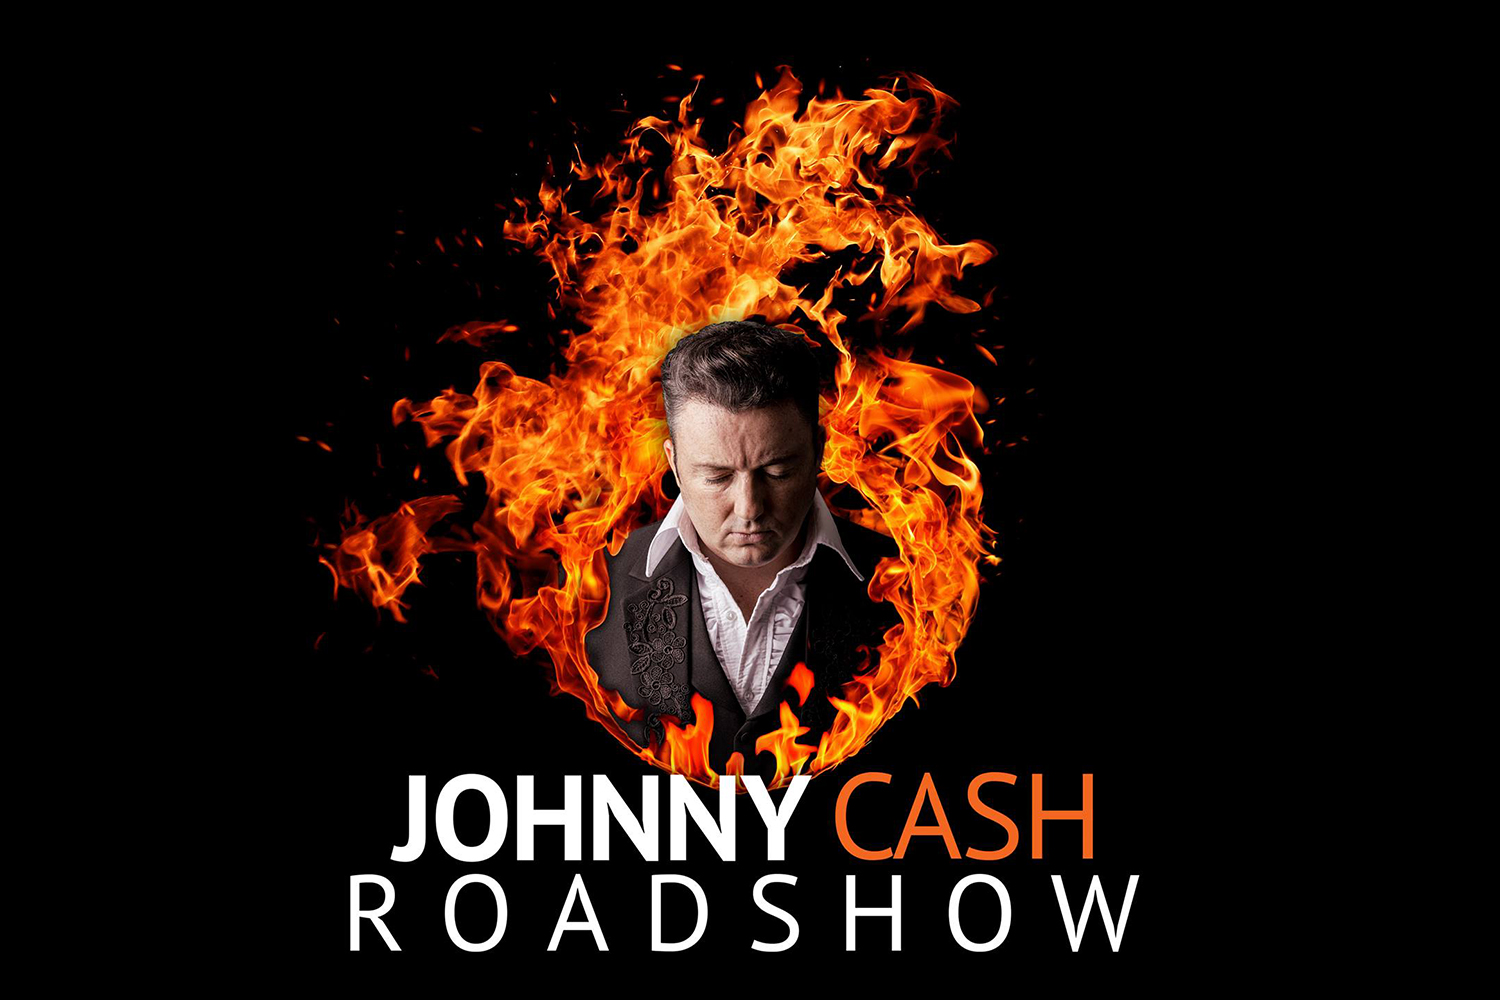 Johnny Cash Roadshow From the Ashes Tour The AtkinsonThe Atkinson